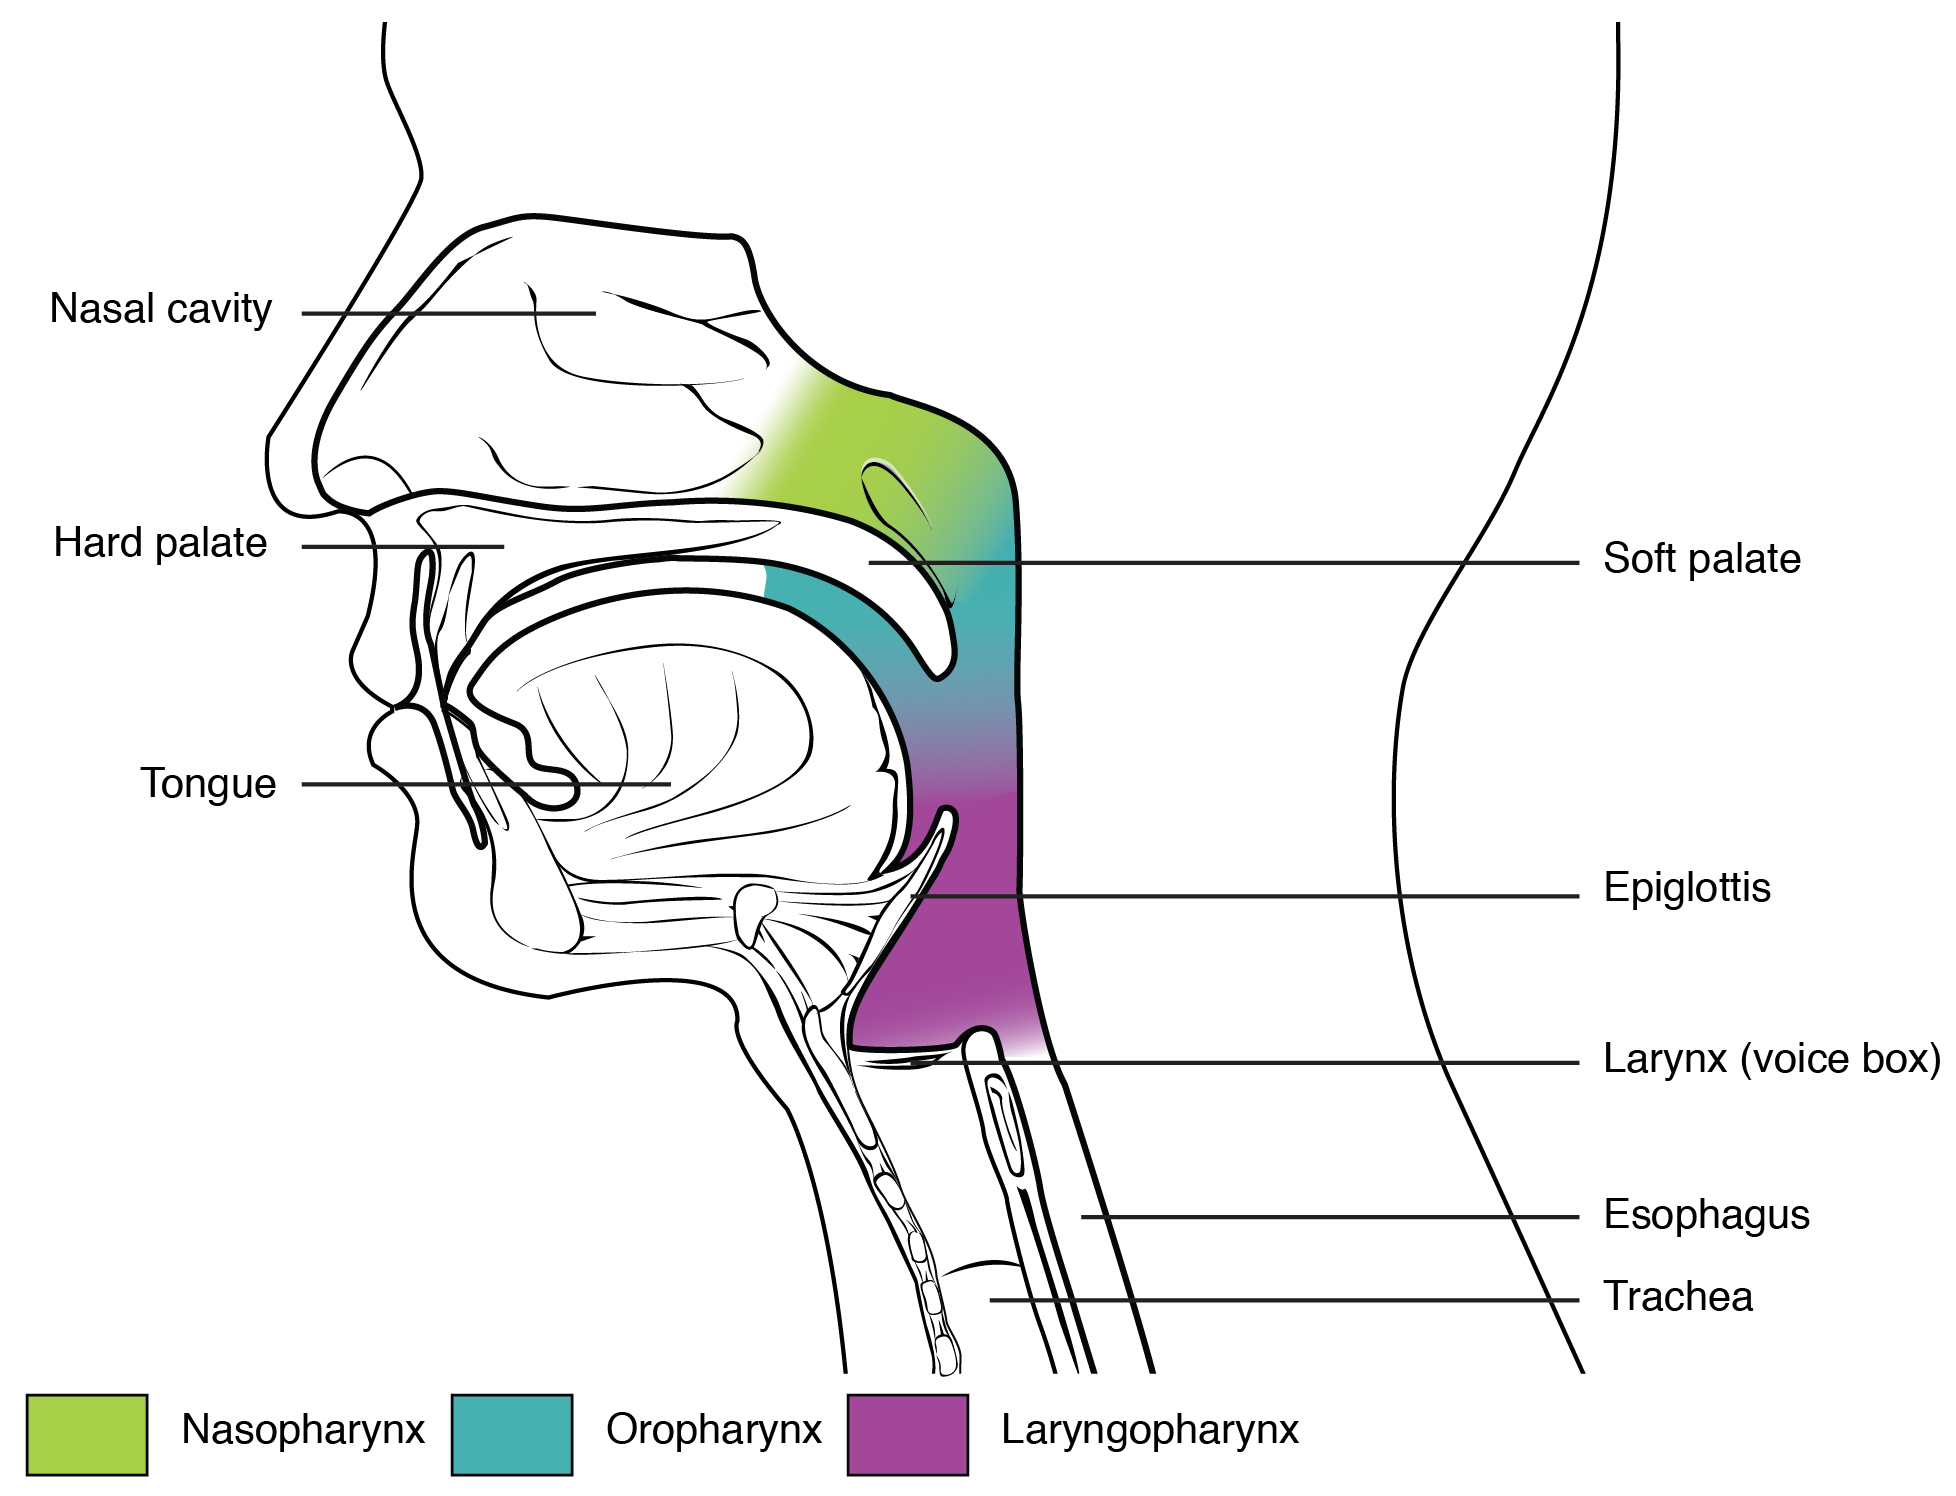 Divisions of the pharynx. Image description available.